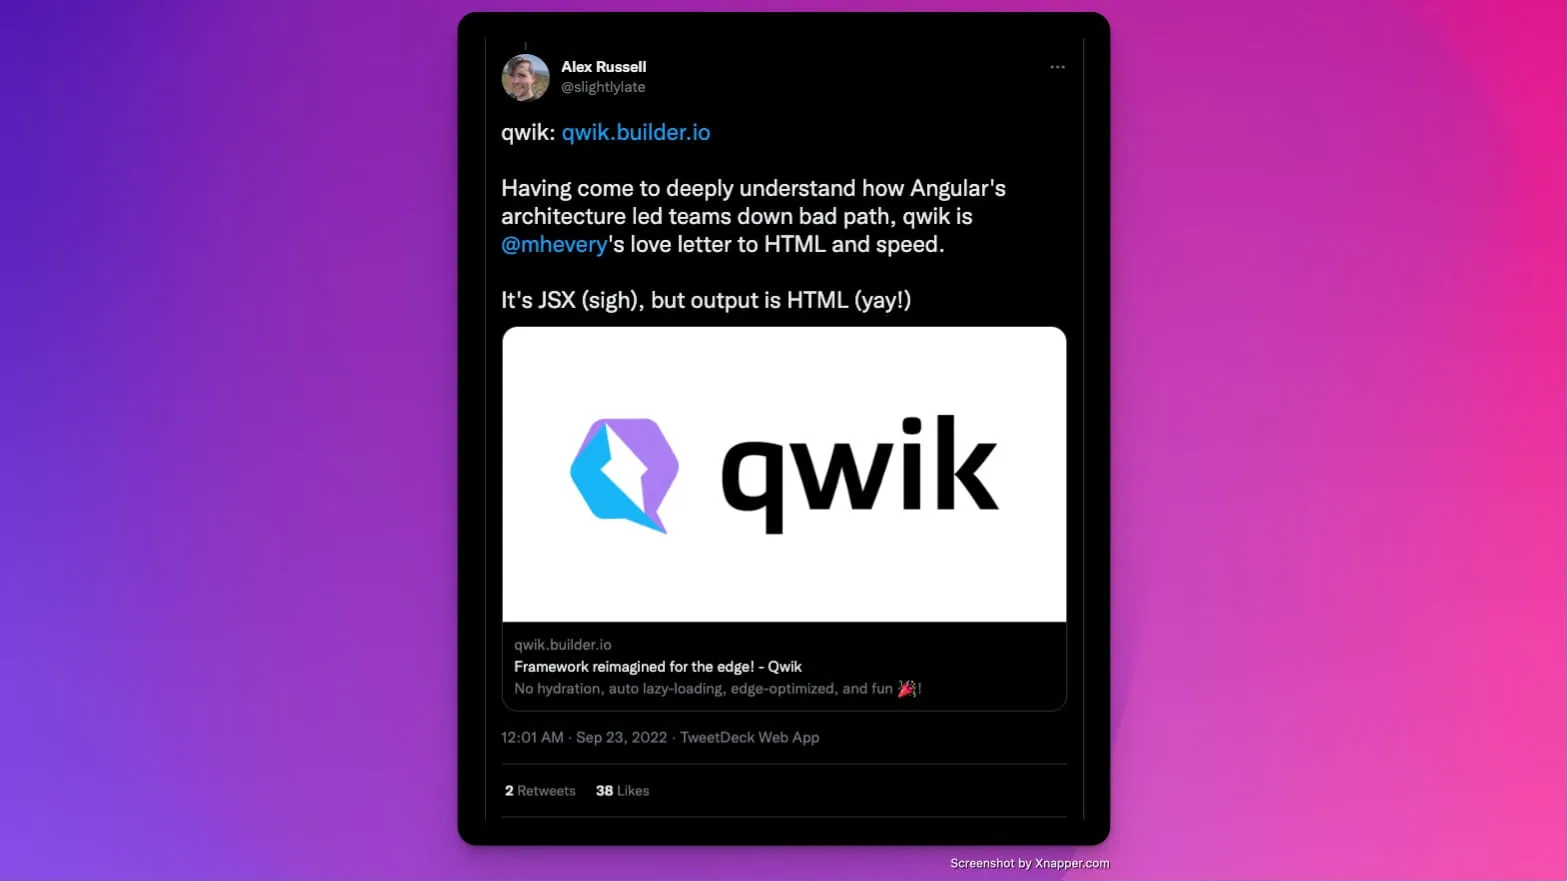 Tweet By Alex Russell about Qwik